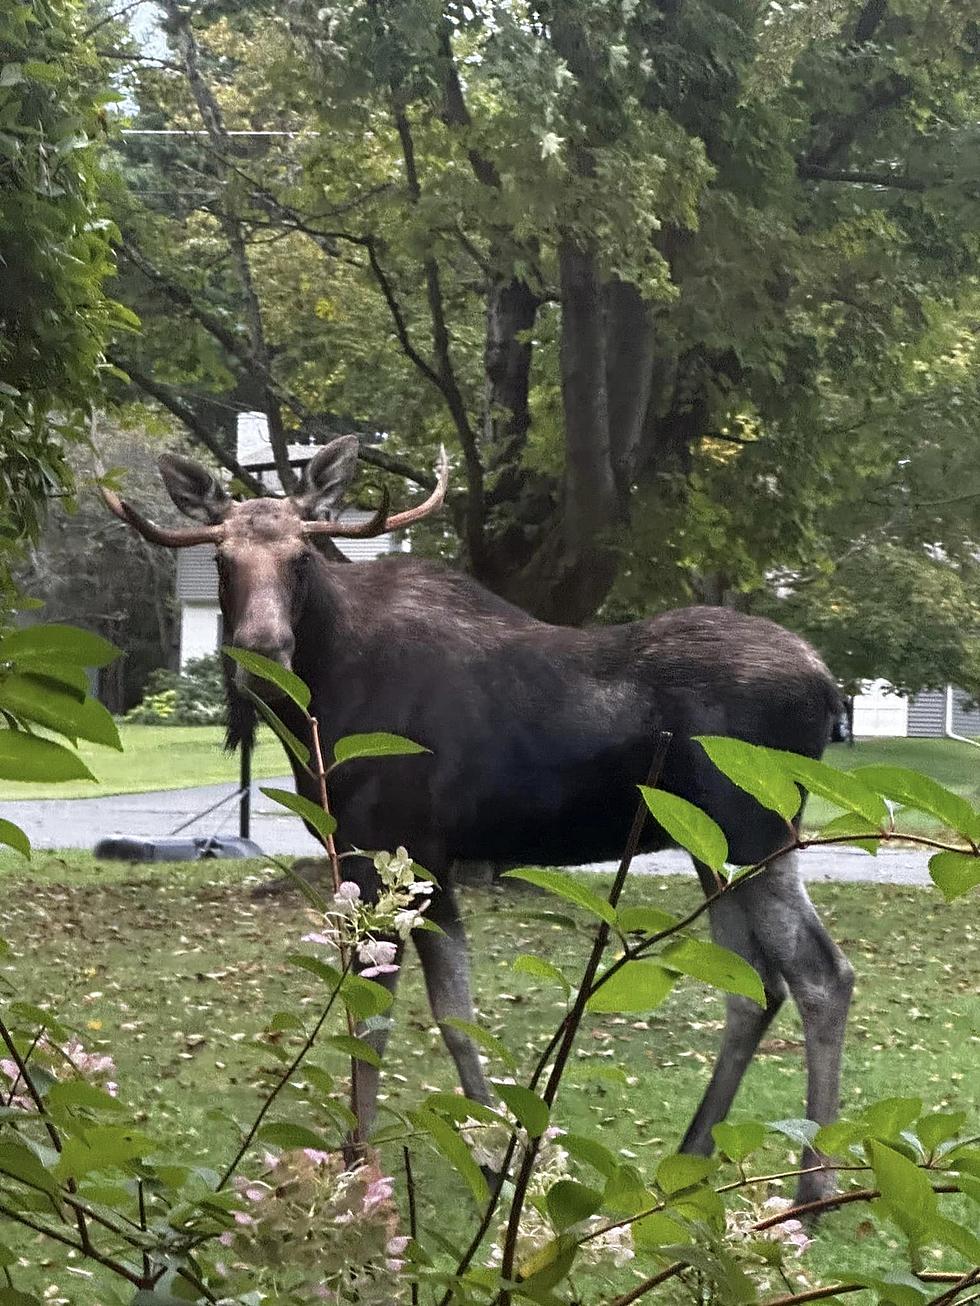 Western Massachusetts Man Stunned By Giant Moose On His Lawn (Video)